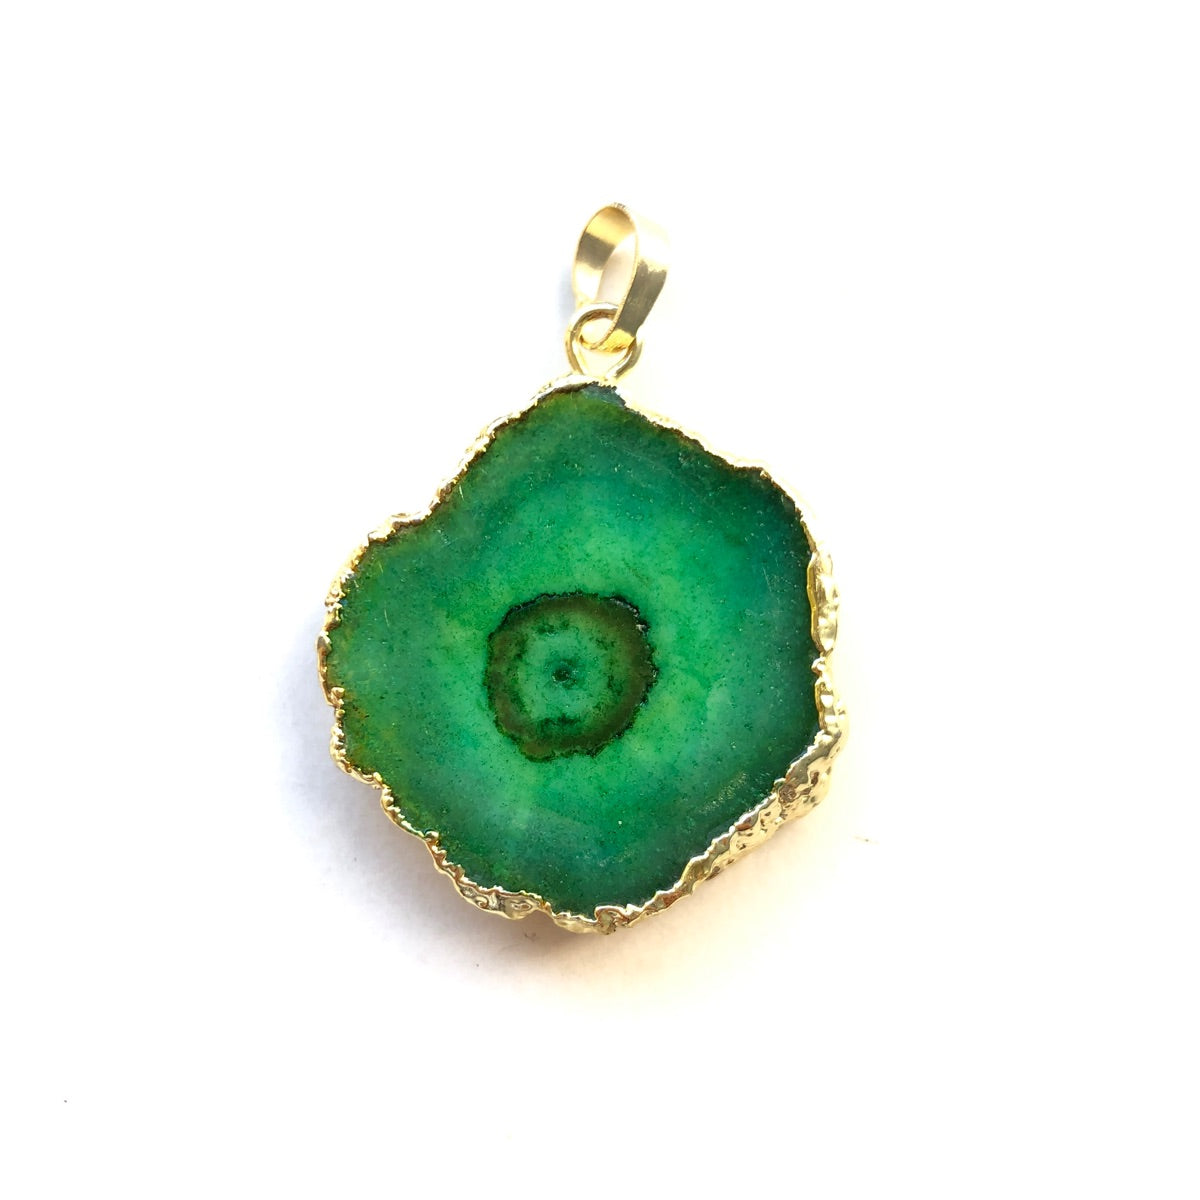 1PC 30mm Gold Plated Sun Flower Agate Charm-Premium Quality Green on Gold Stone Charms Charms Beads Beyond